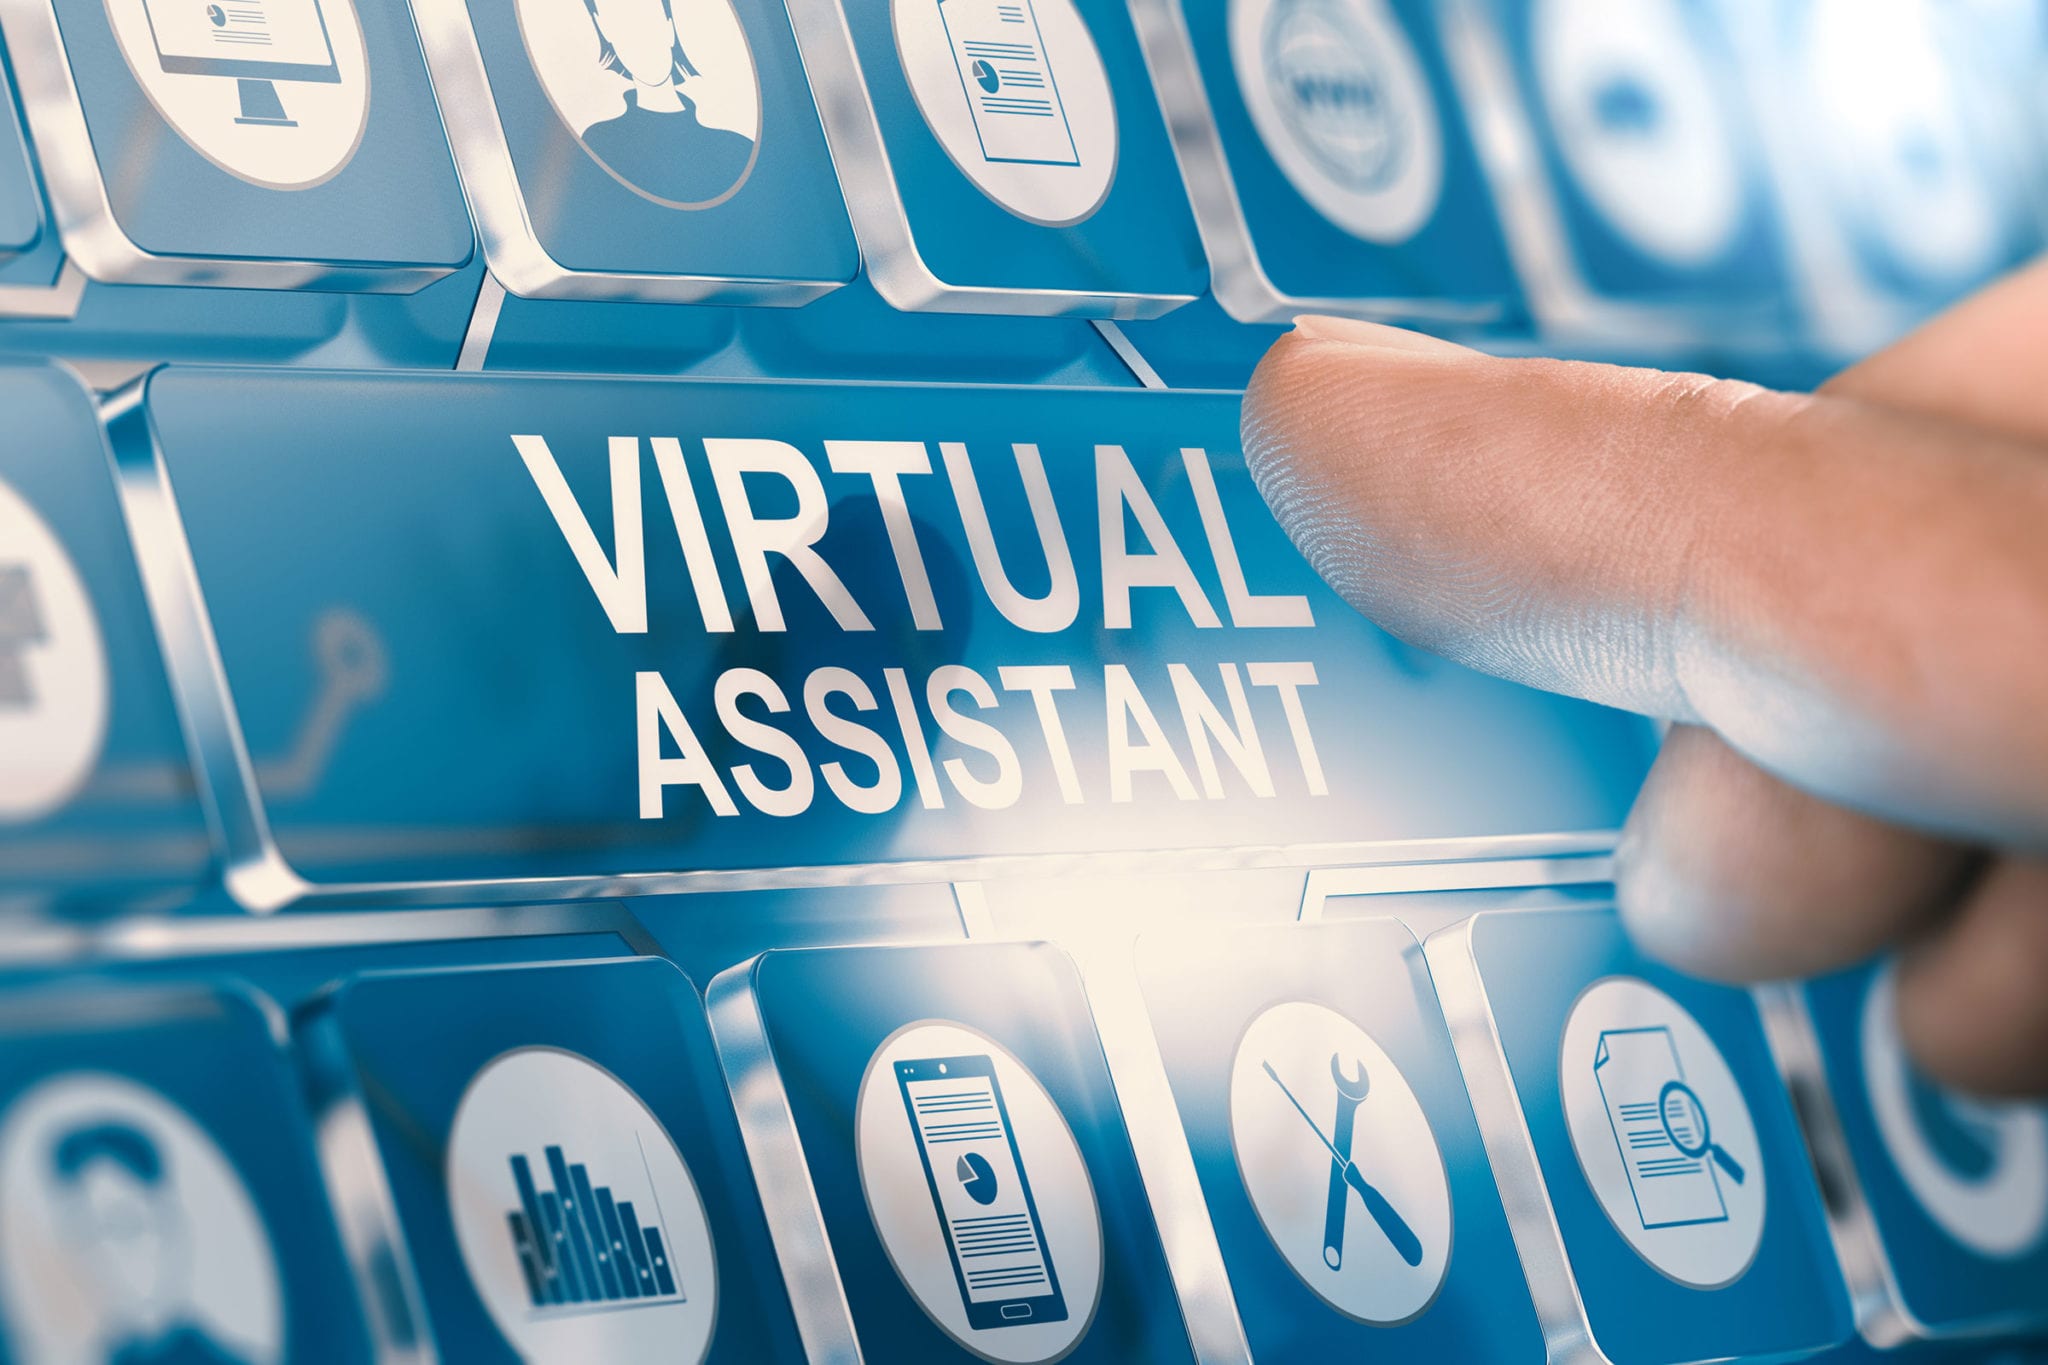 Virtual Assistant on Fiverr